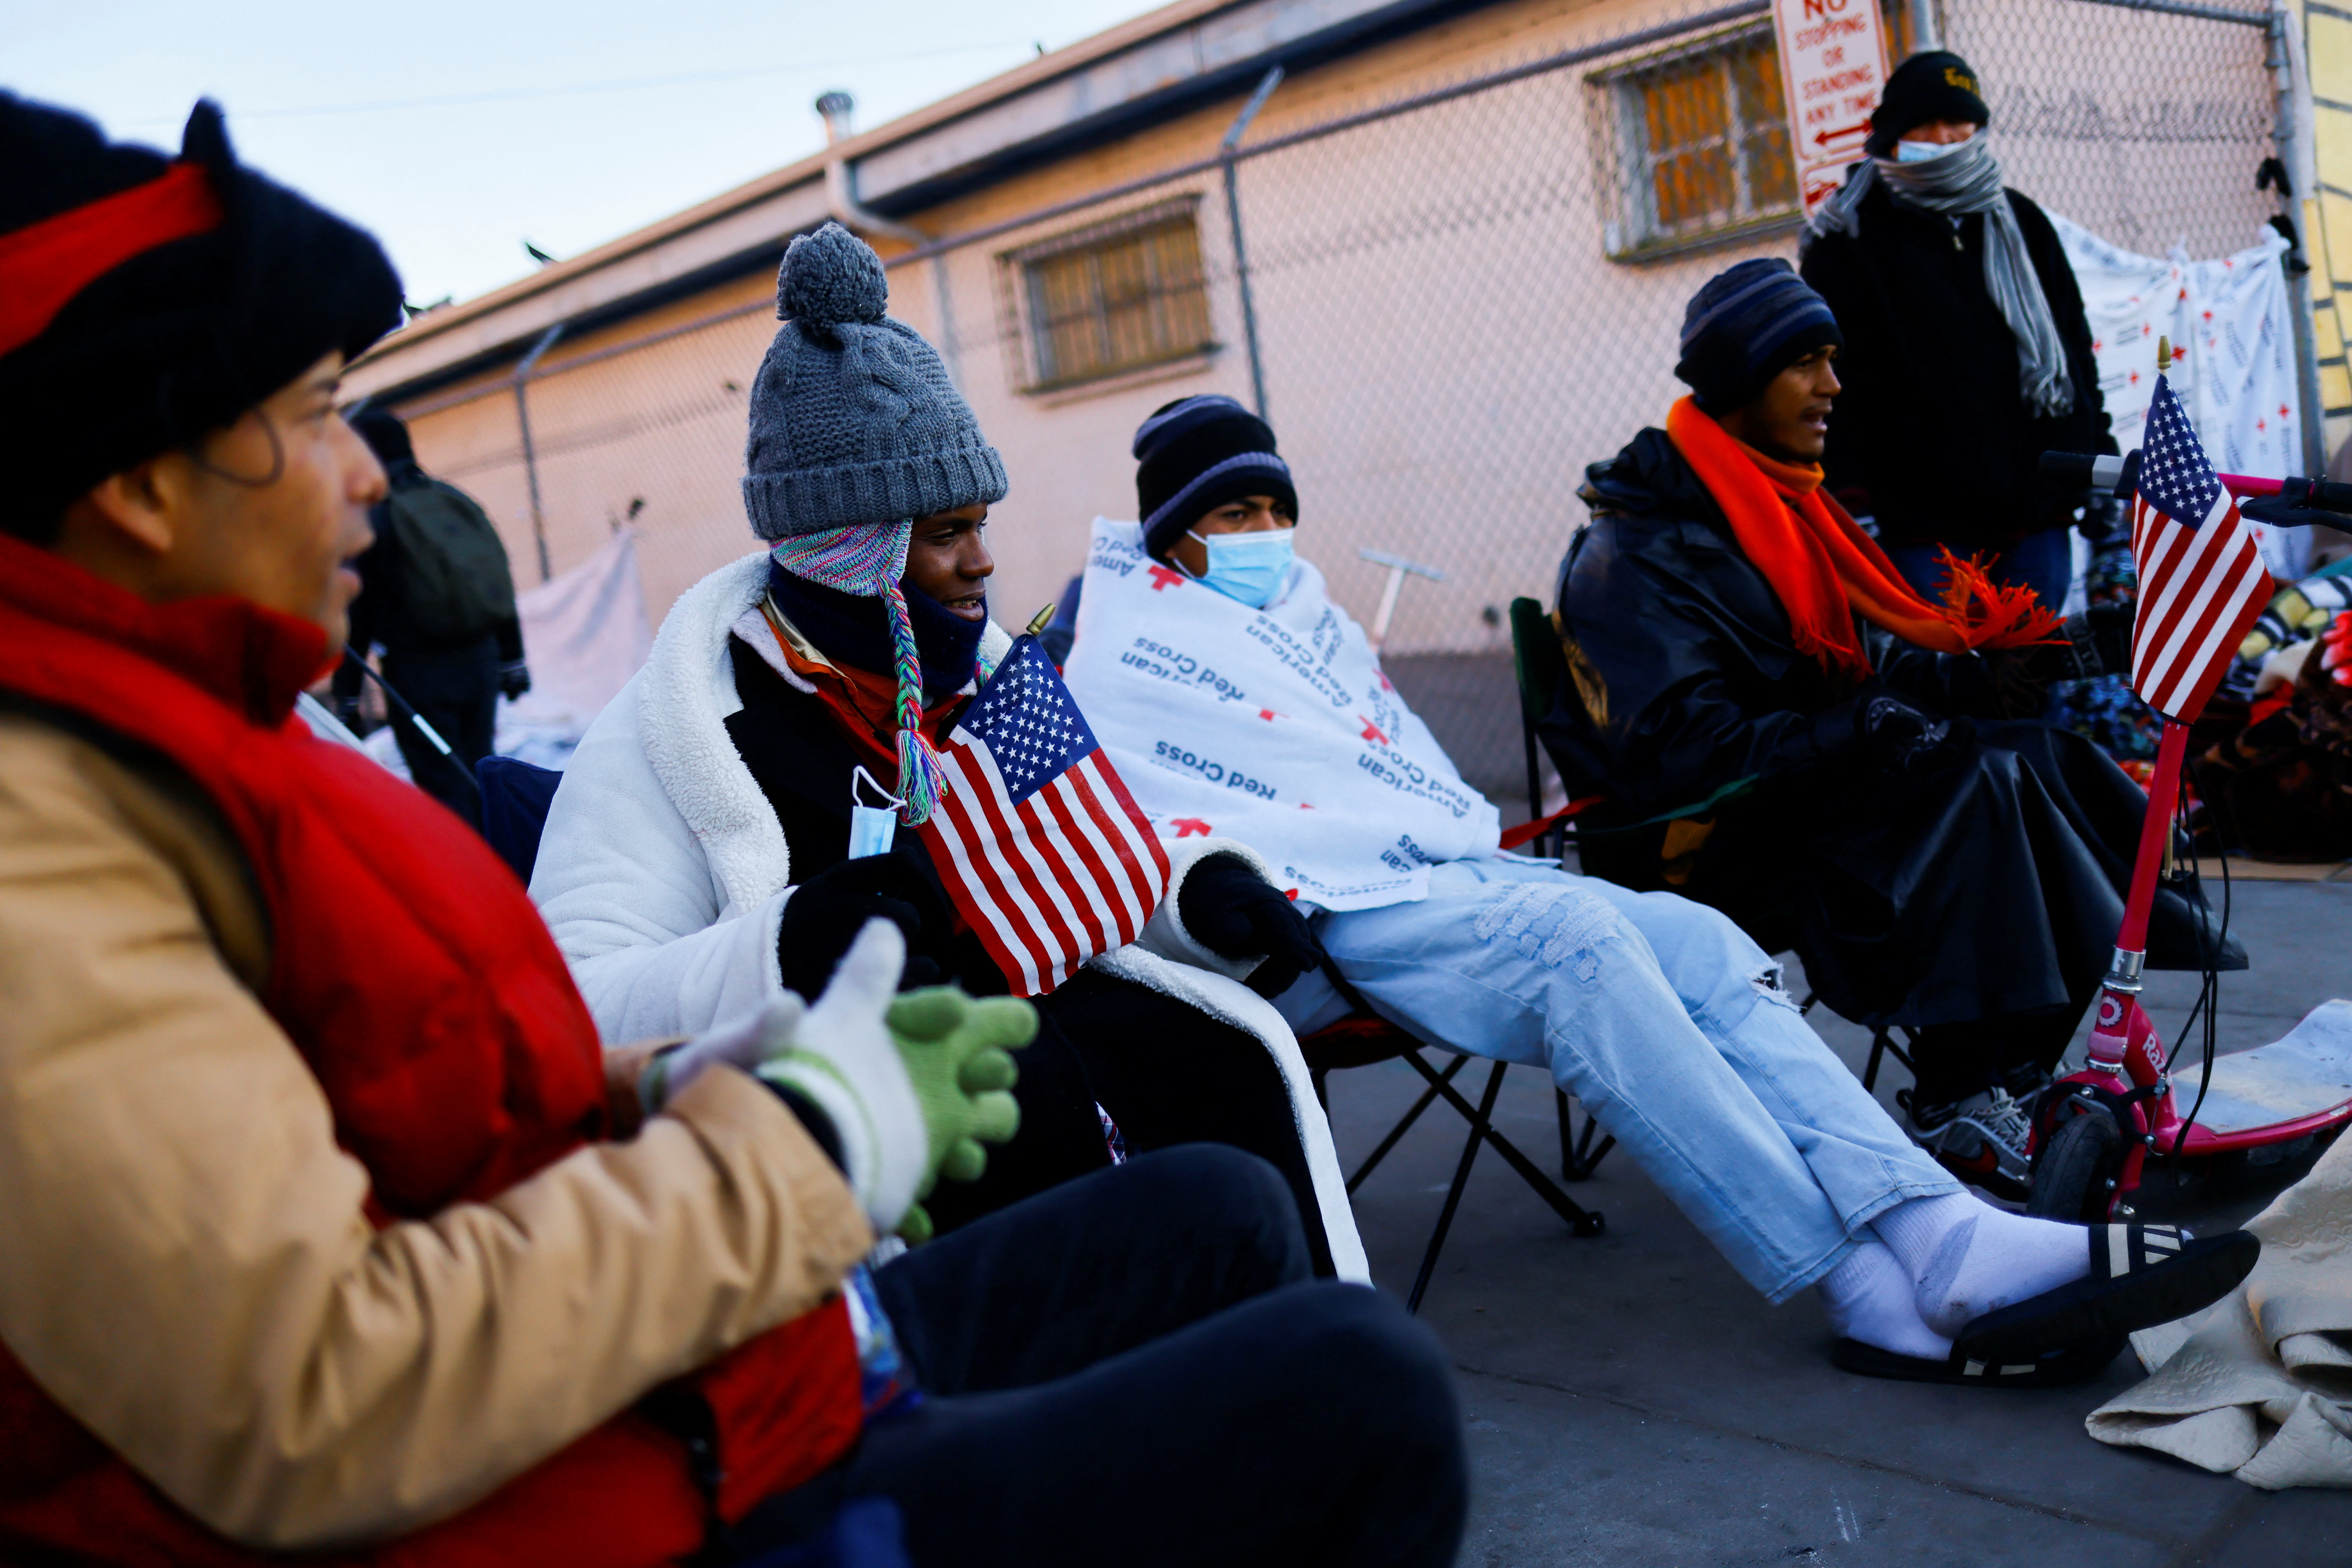 Migrants sit in foldable chairs on the day that U.S. President Biden and first lady Jill Biden visit El Paso